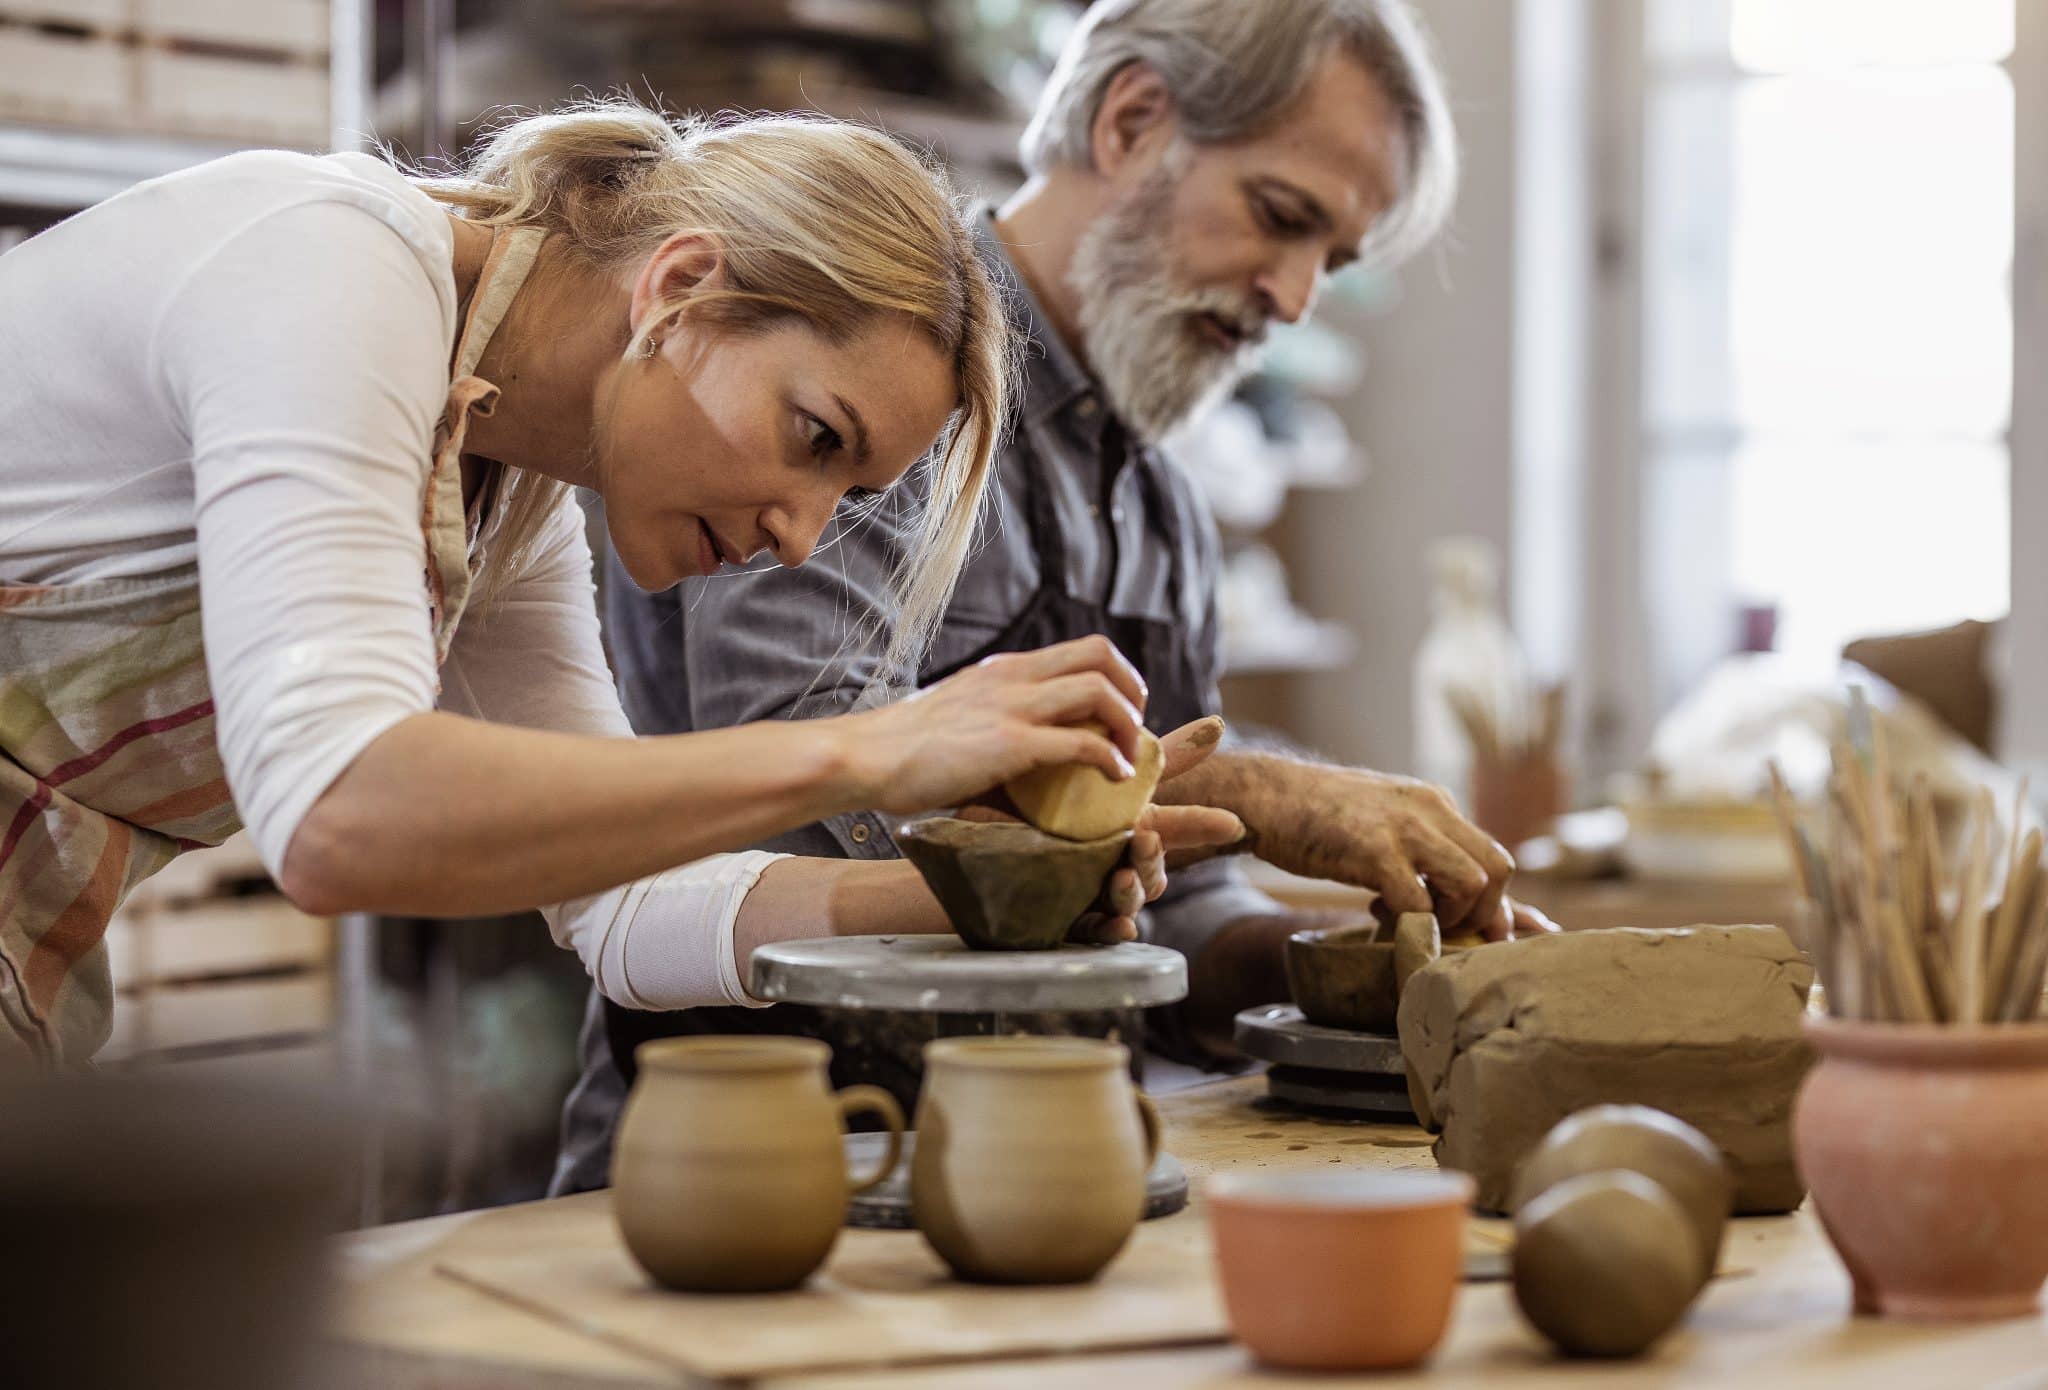 A man and woman learn pottery basics, one of the many fun hobbies you can explore from your home at Shoal Creek.